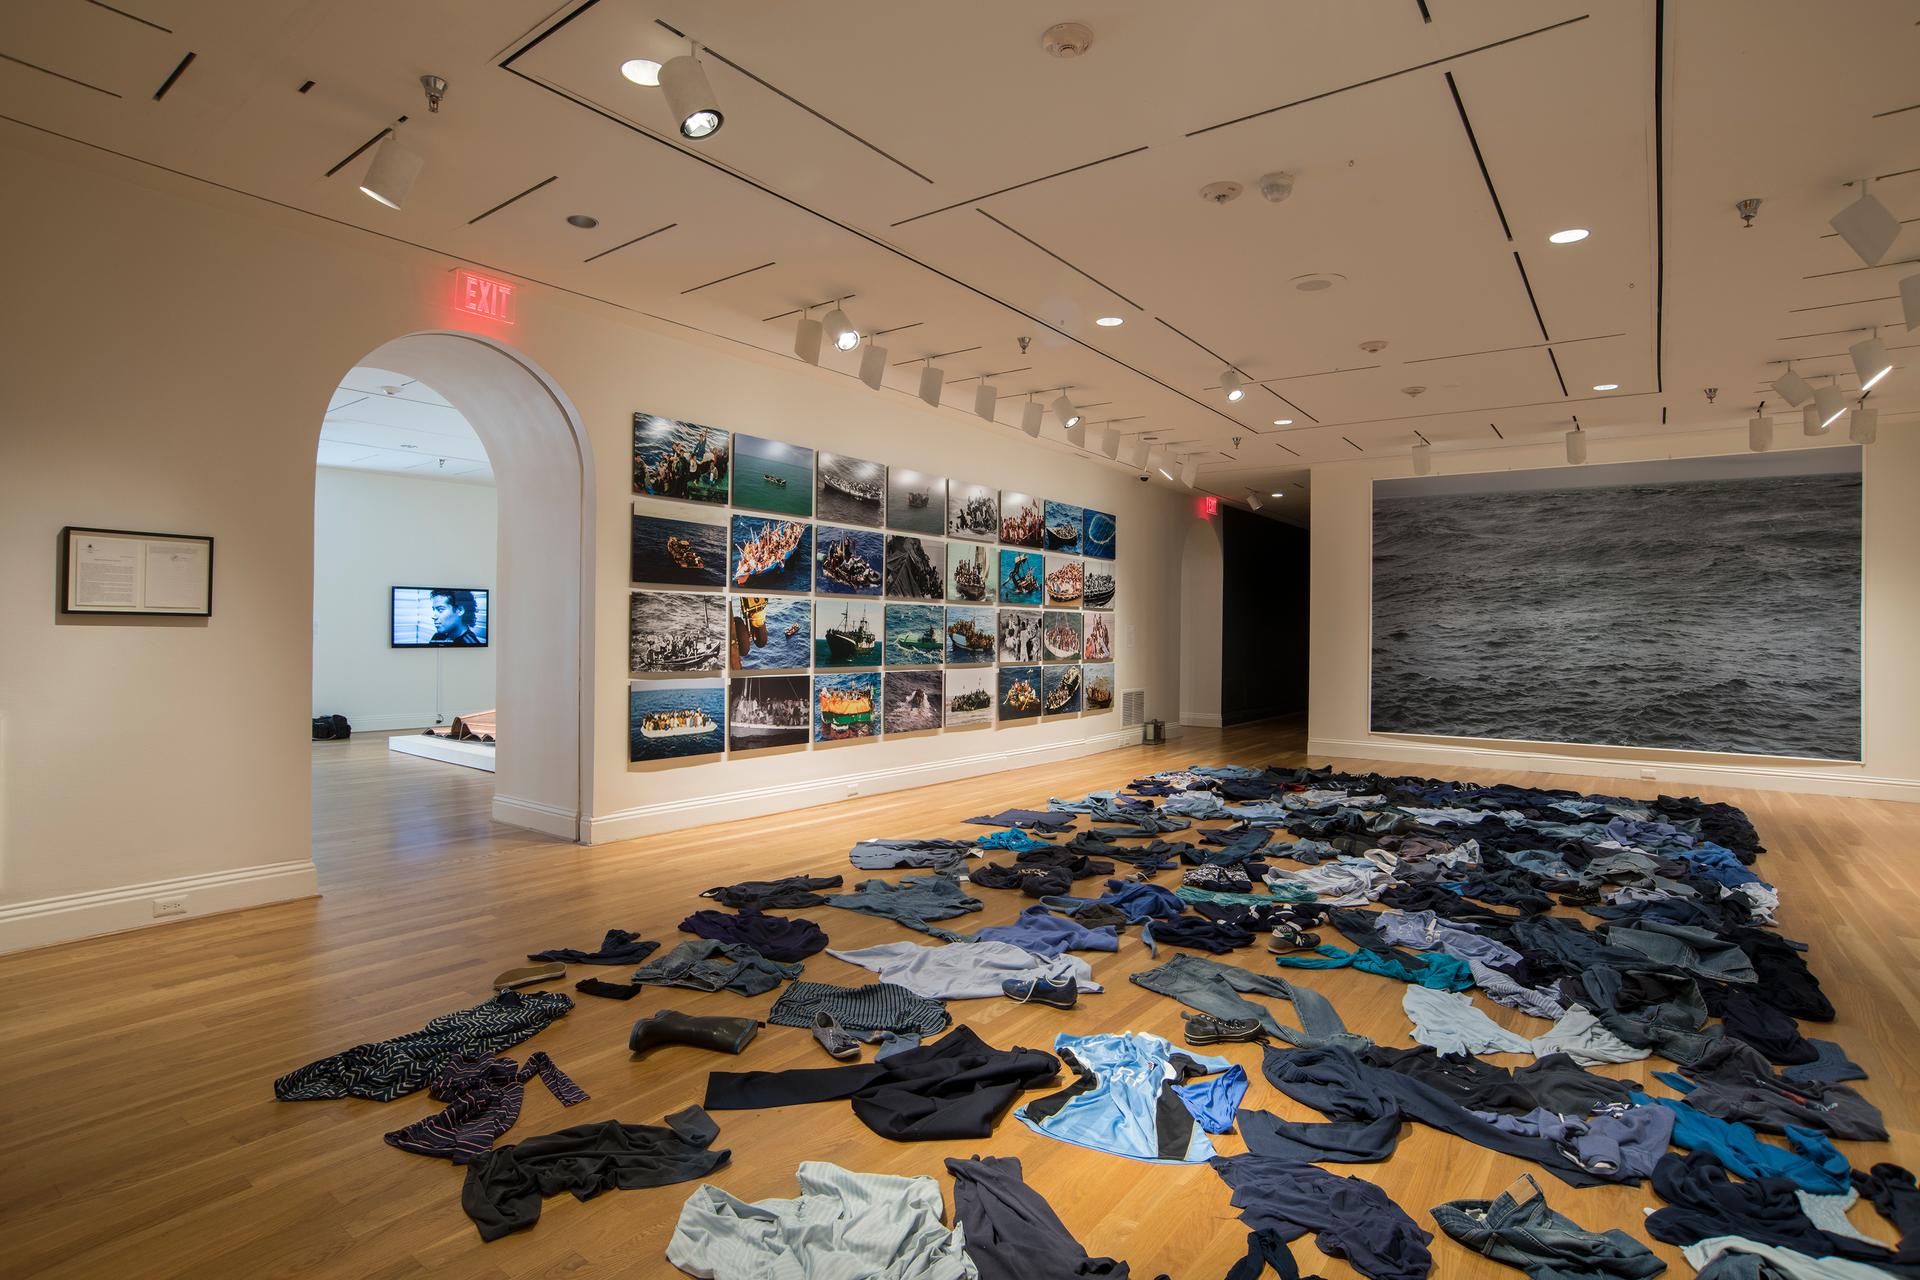 Dark colored clothes are strewn on the floor in an art exhibition.